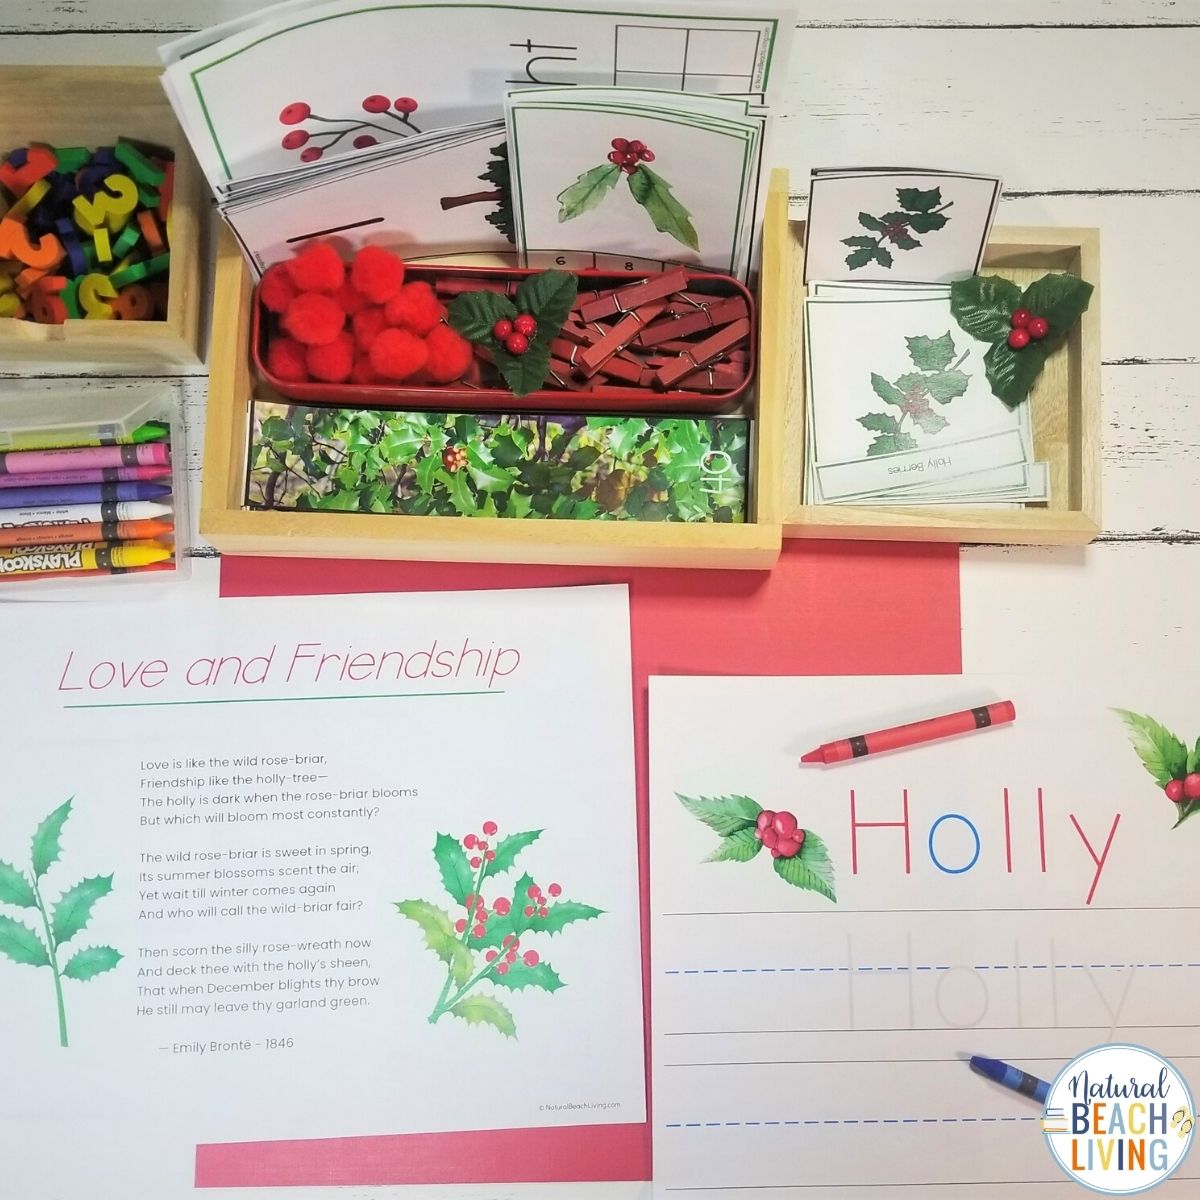 Holly Tree Theme Unit for 3-9 year olds. This is an amazing winter theme full of learning opportunities. You'll get Montessori 3 part cards, Holly Coloring Pages, Holly Tree Handwriting Pages, Winter Poetry and Writing Prompts, Holly Tree Life Cycle with Control Chart, Holly Tree Sequencing Cards, and Tons of early math skills activities